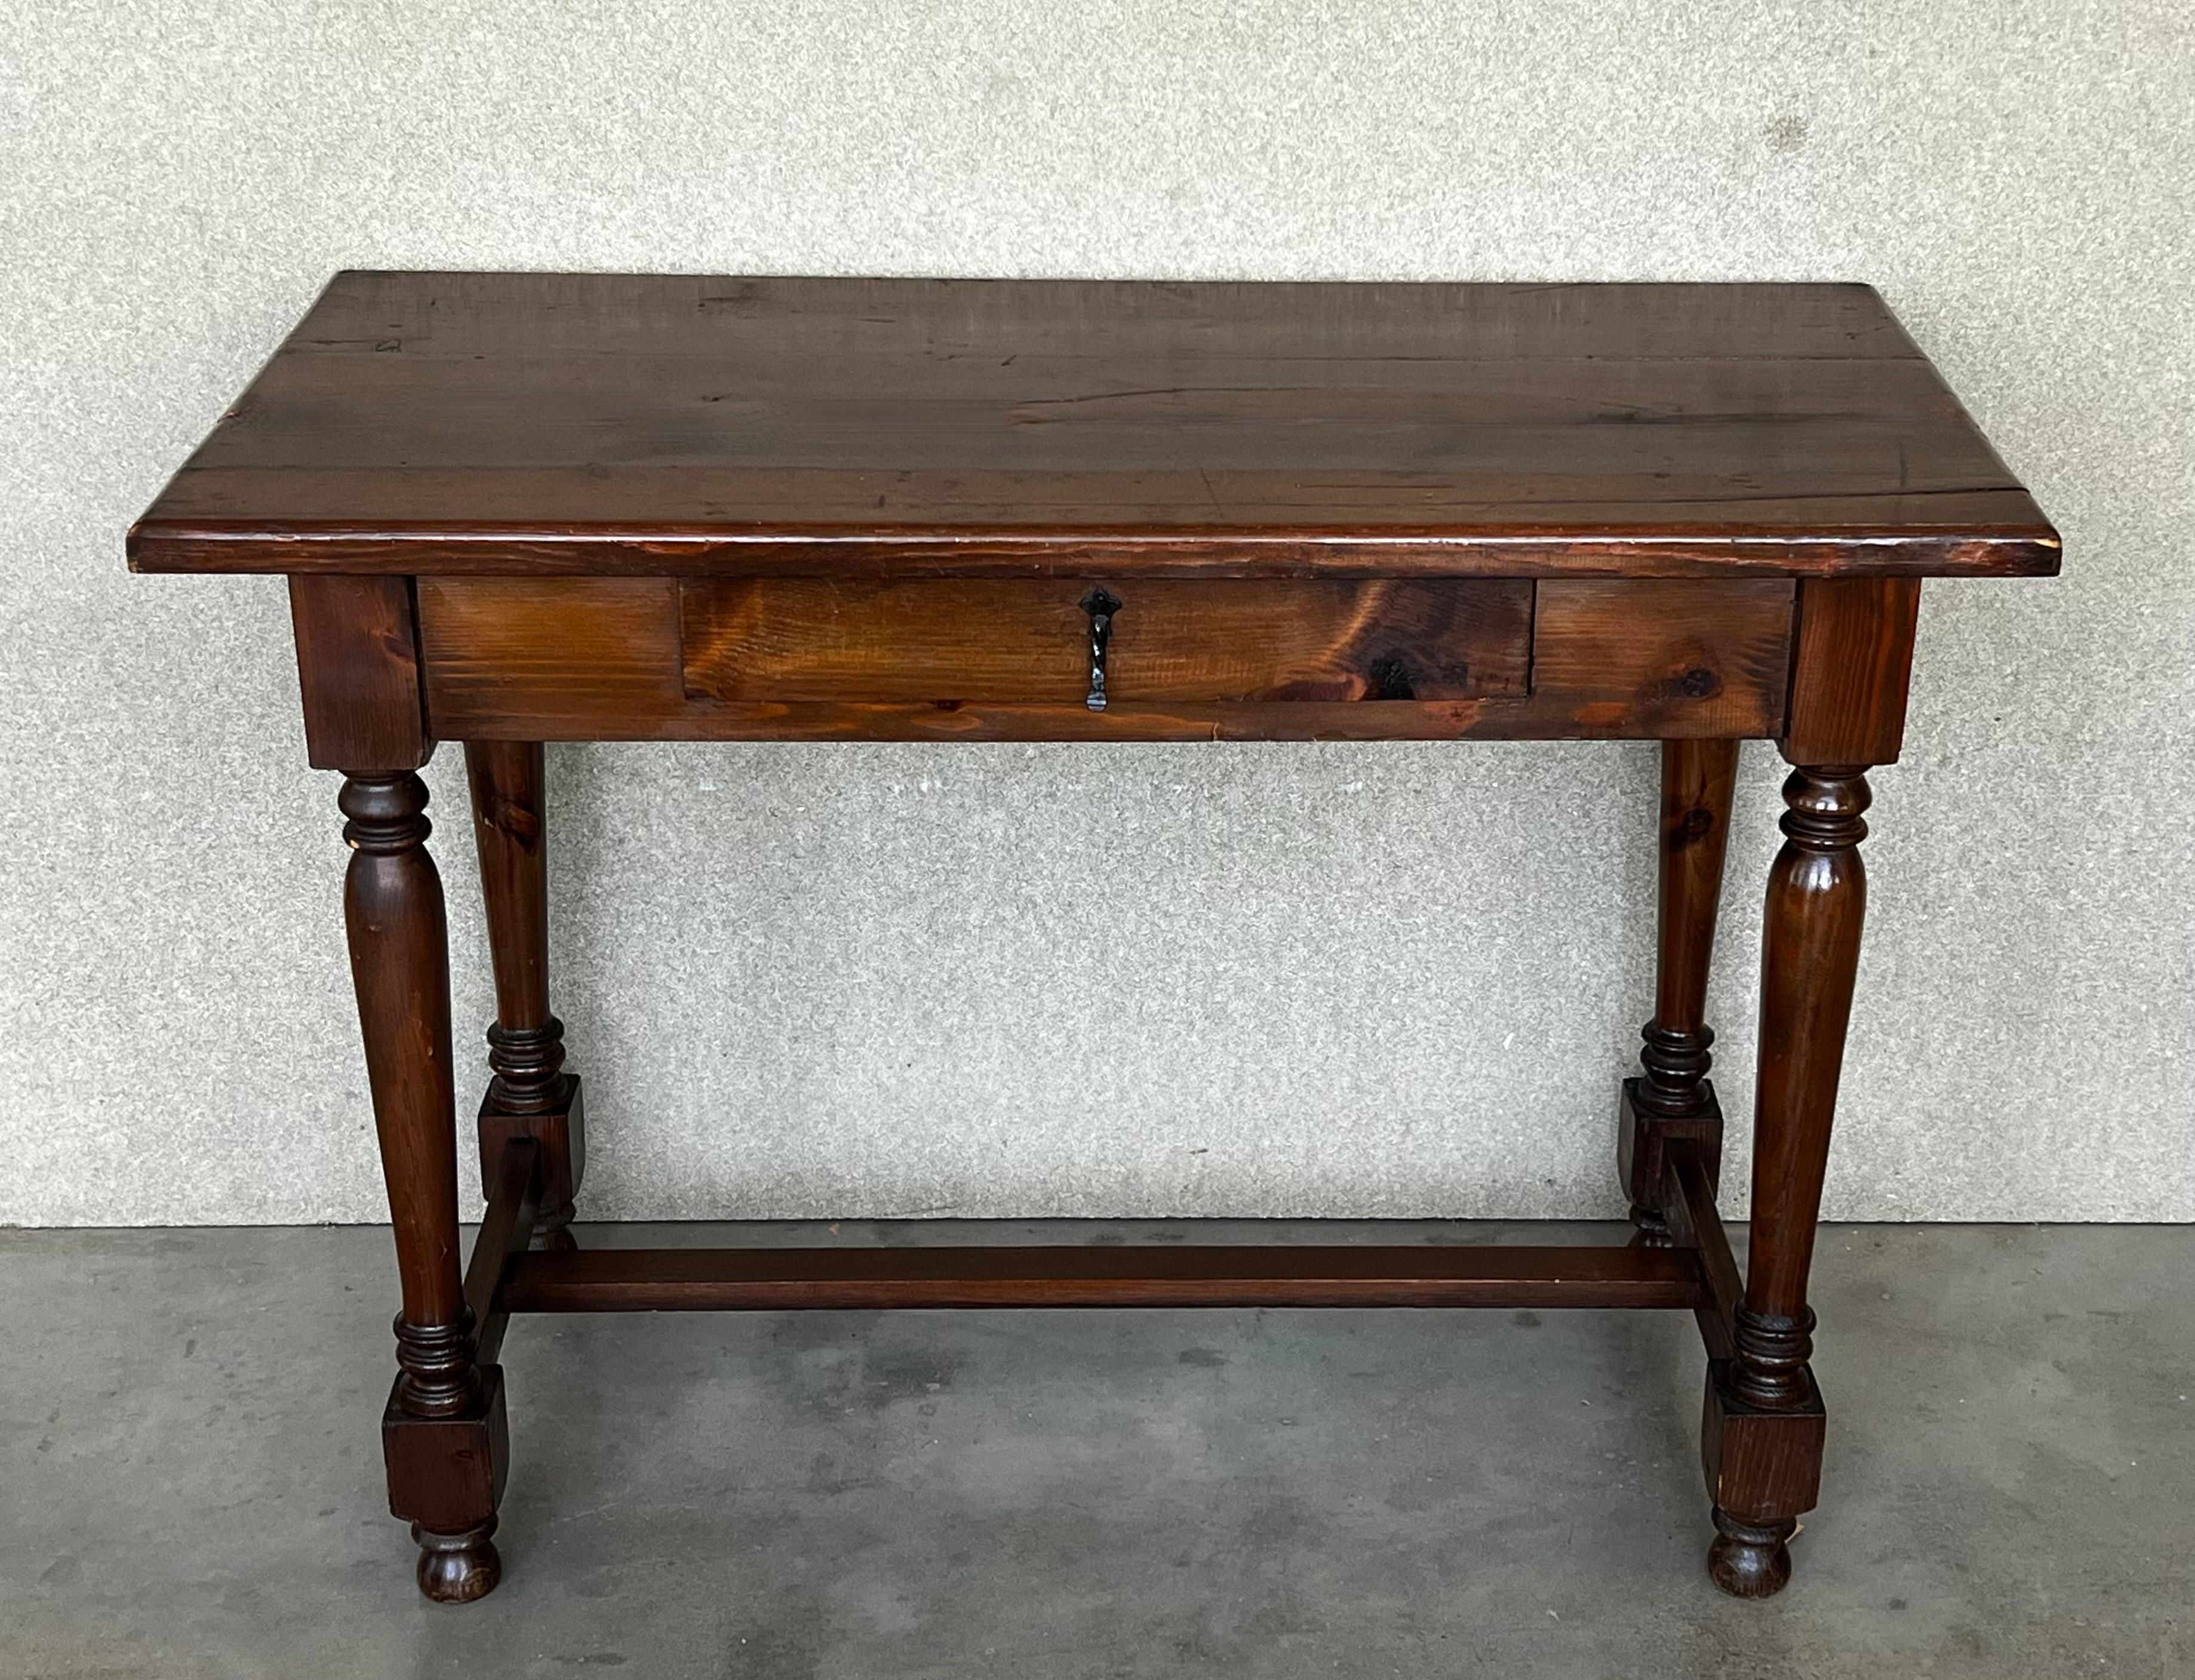 Renaissance 20th Century Spanish Walnut Side Table or Console Table with Drawer